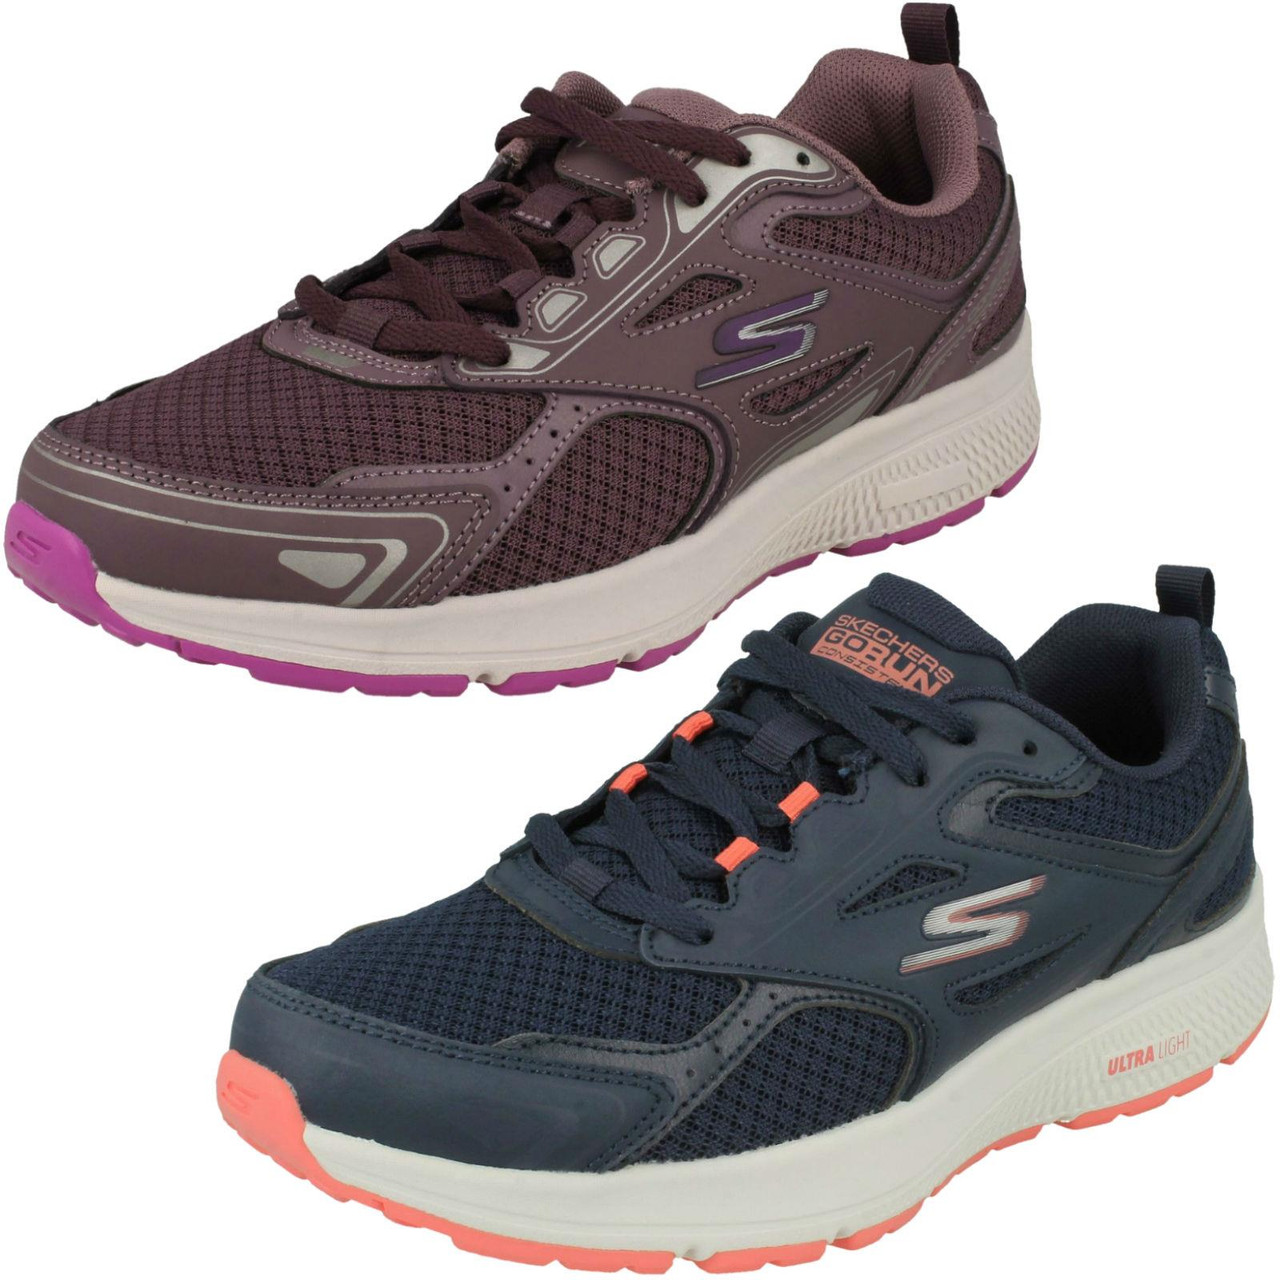 skechers air cooled trainers